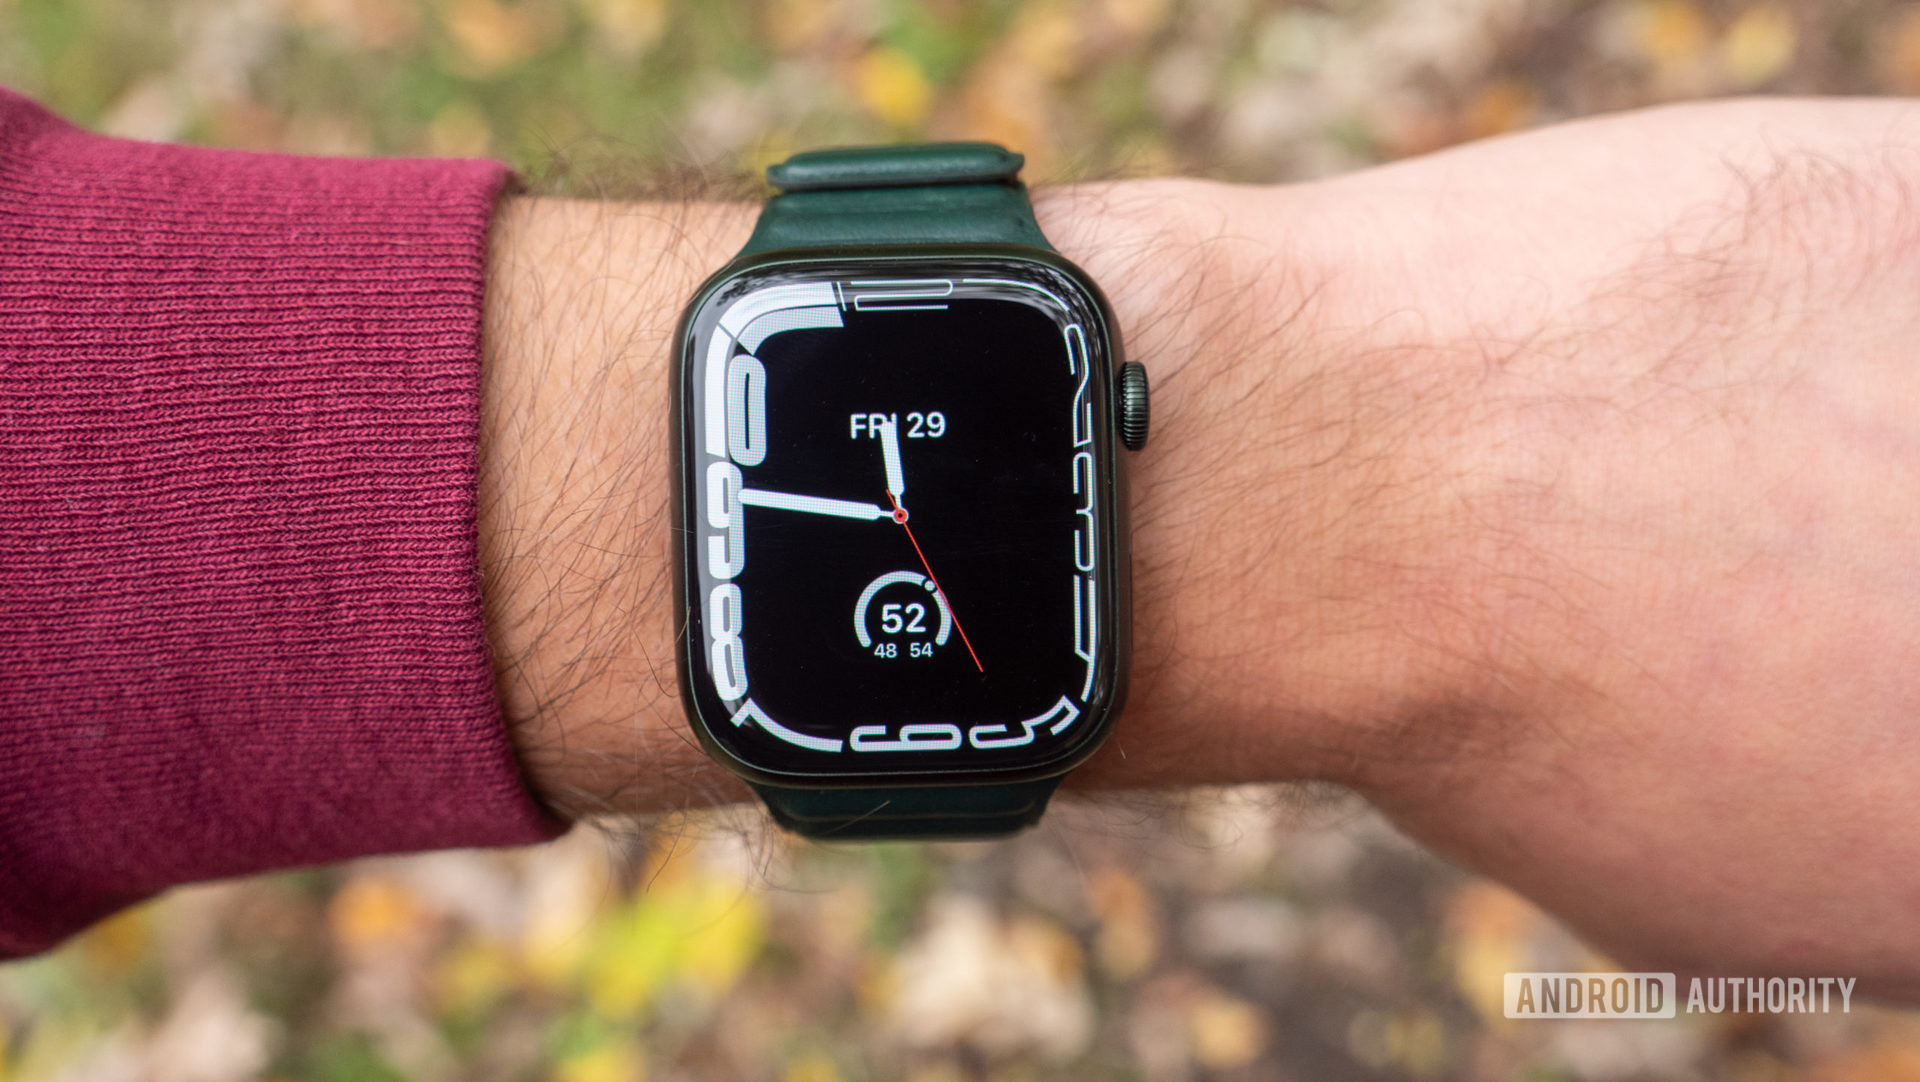 The Apple Watch Series 7 on a wrist showing the Contour watch face